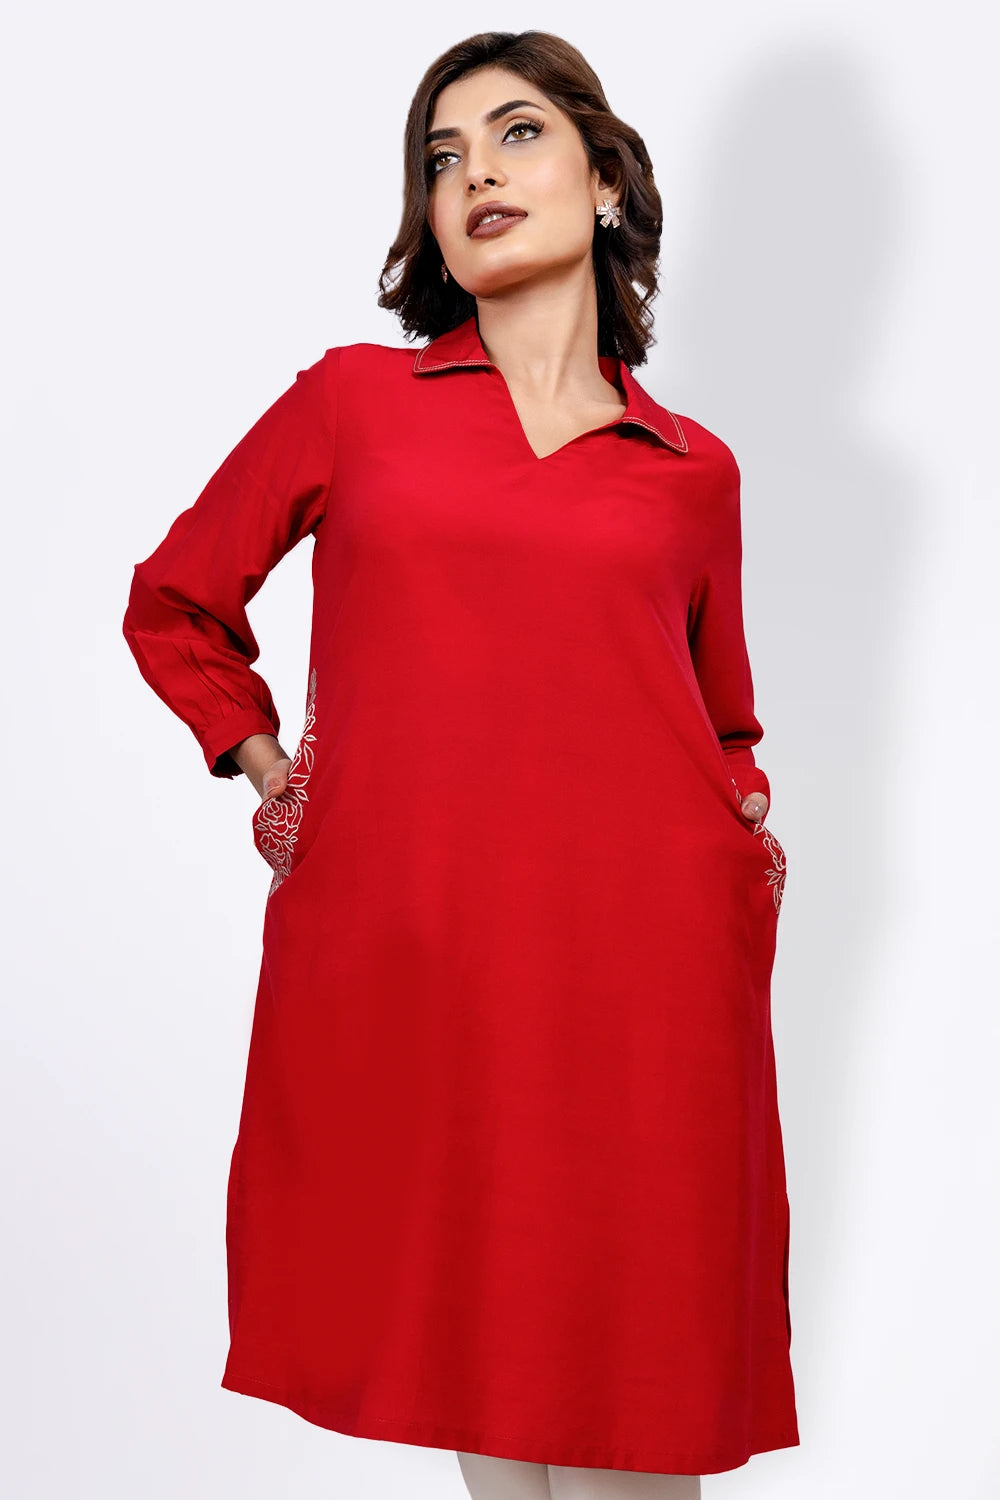 Embroidered Kurti With Pockets